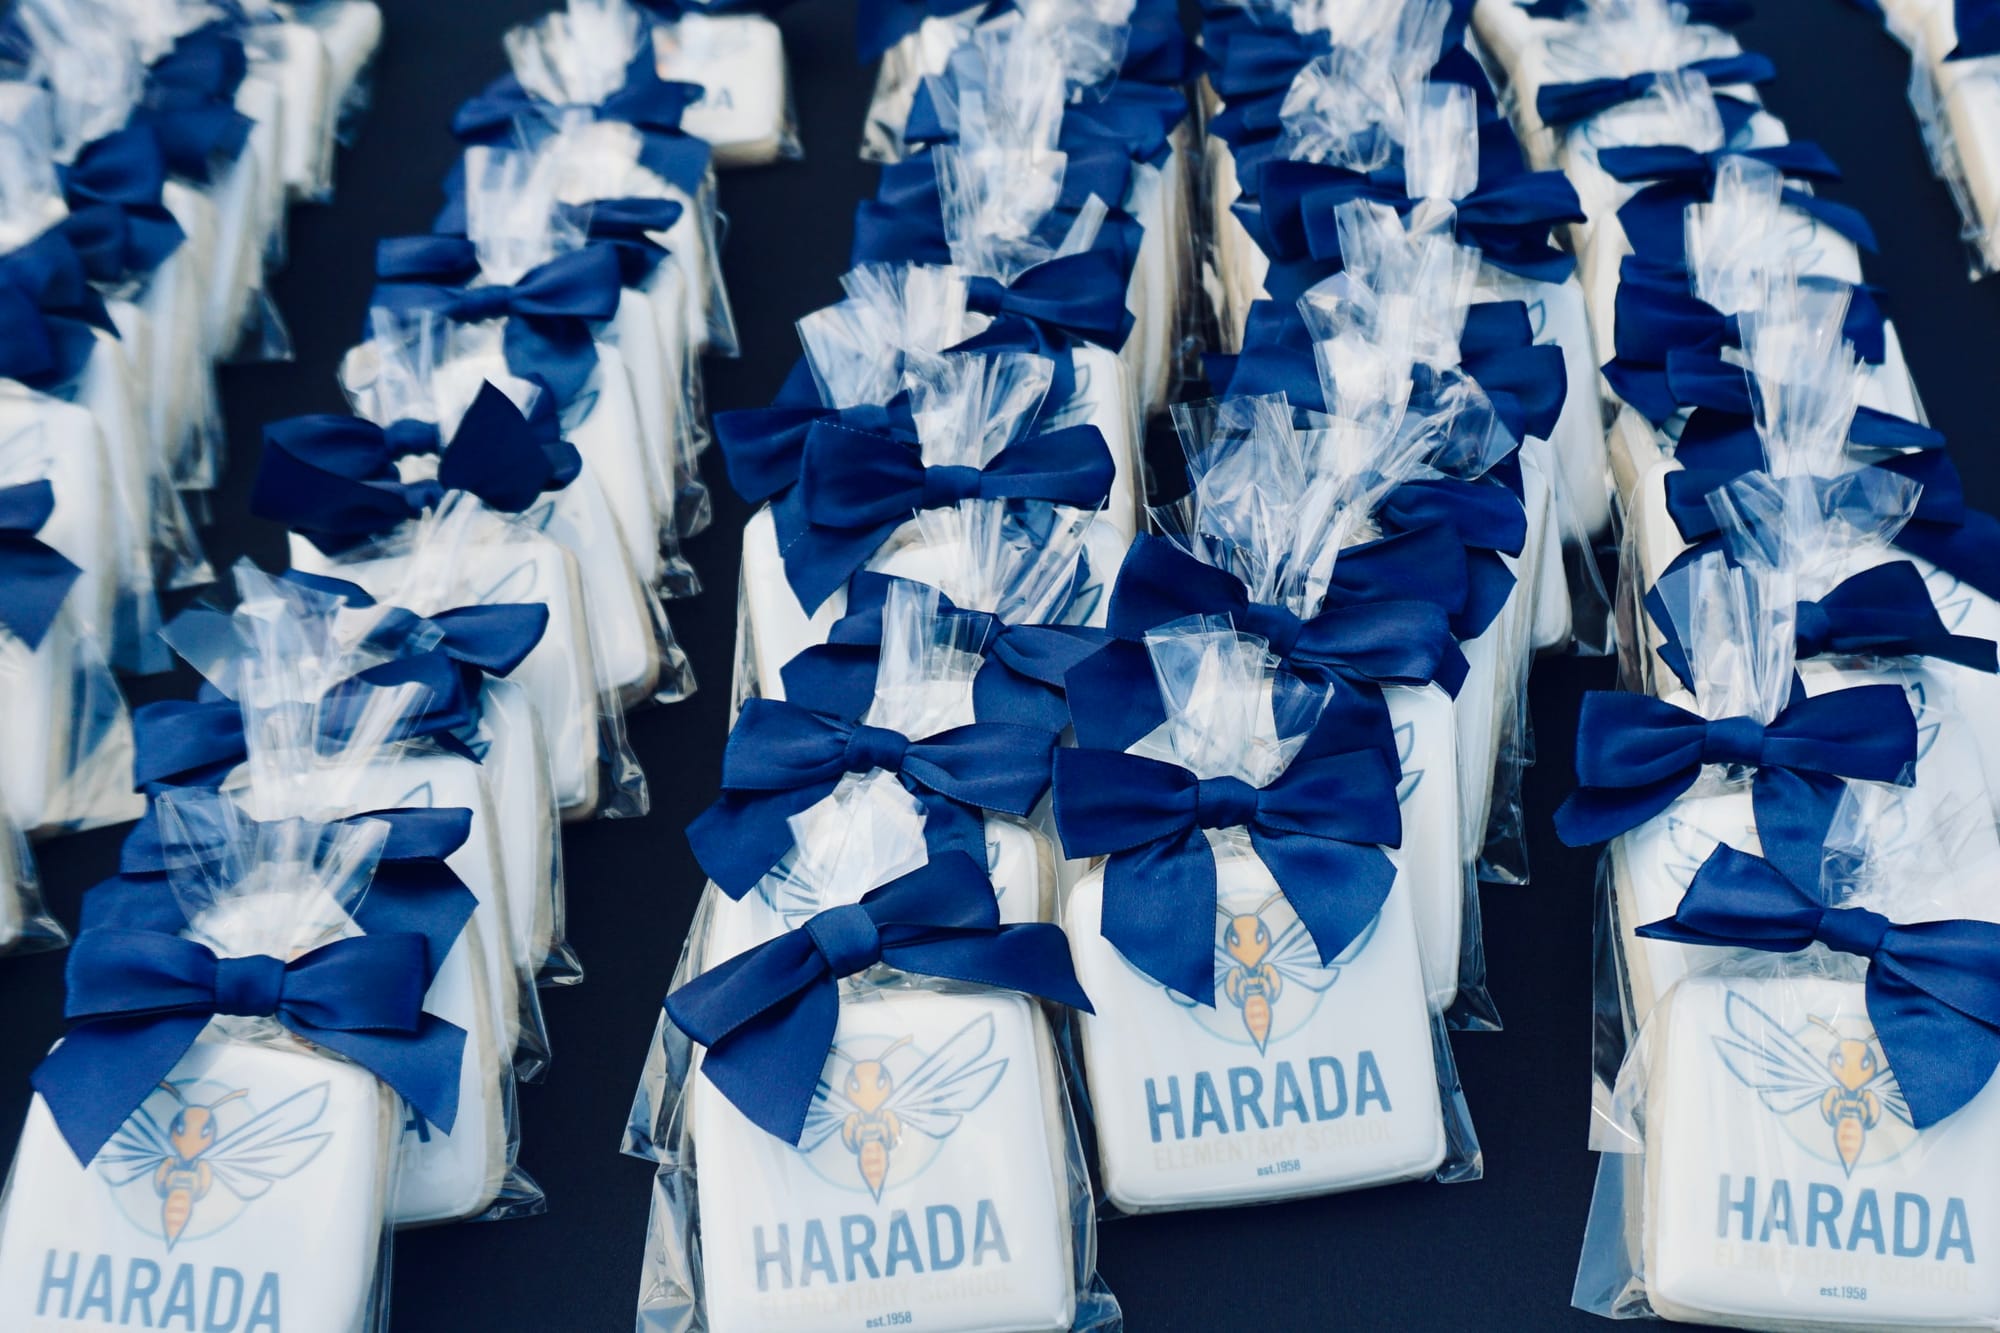 Highland Elementary renamed Harada in honor of the pioneering Riverside family